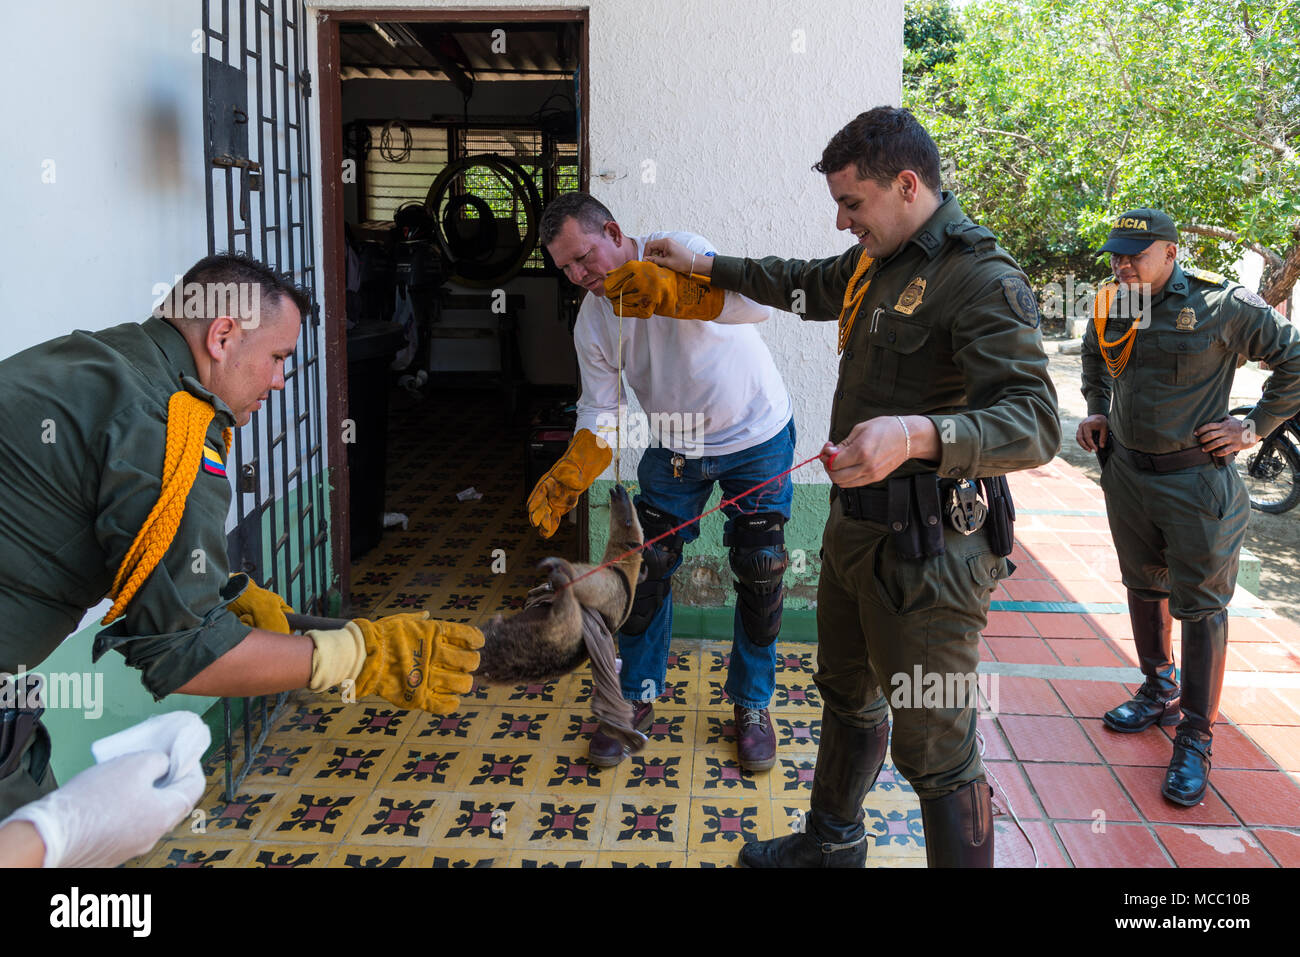 Park rangers wrestle an injured ant-eater to provide medical treatment. Parque Isla de Salamanca. Colombia, South America. Stock Photo